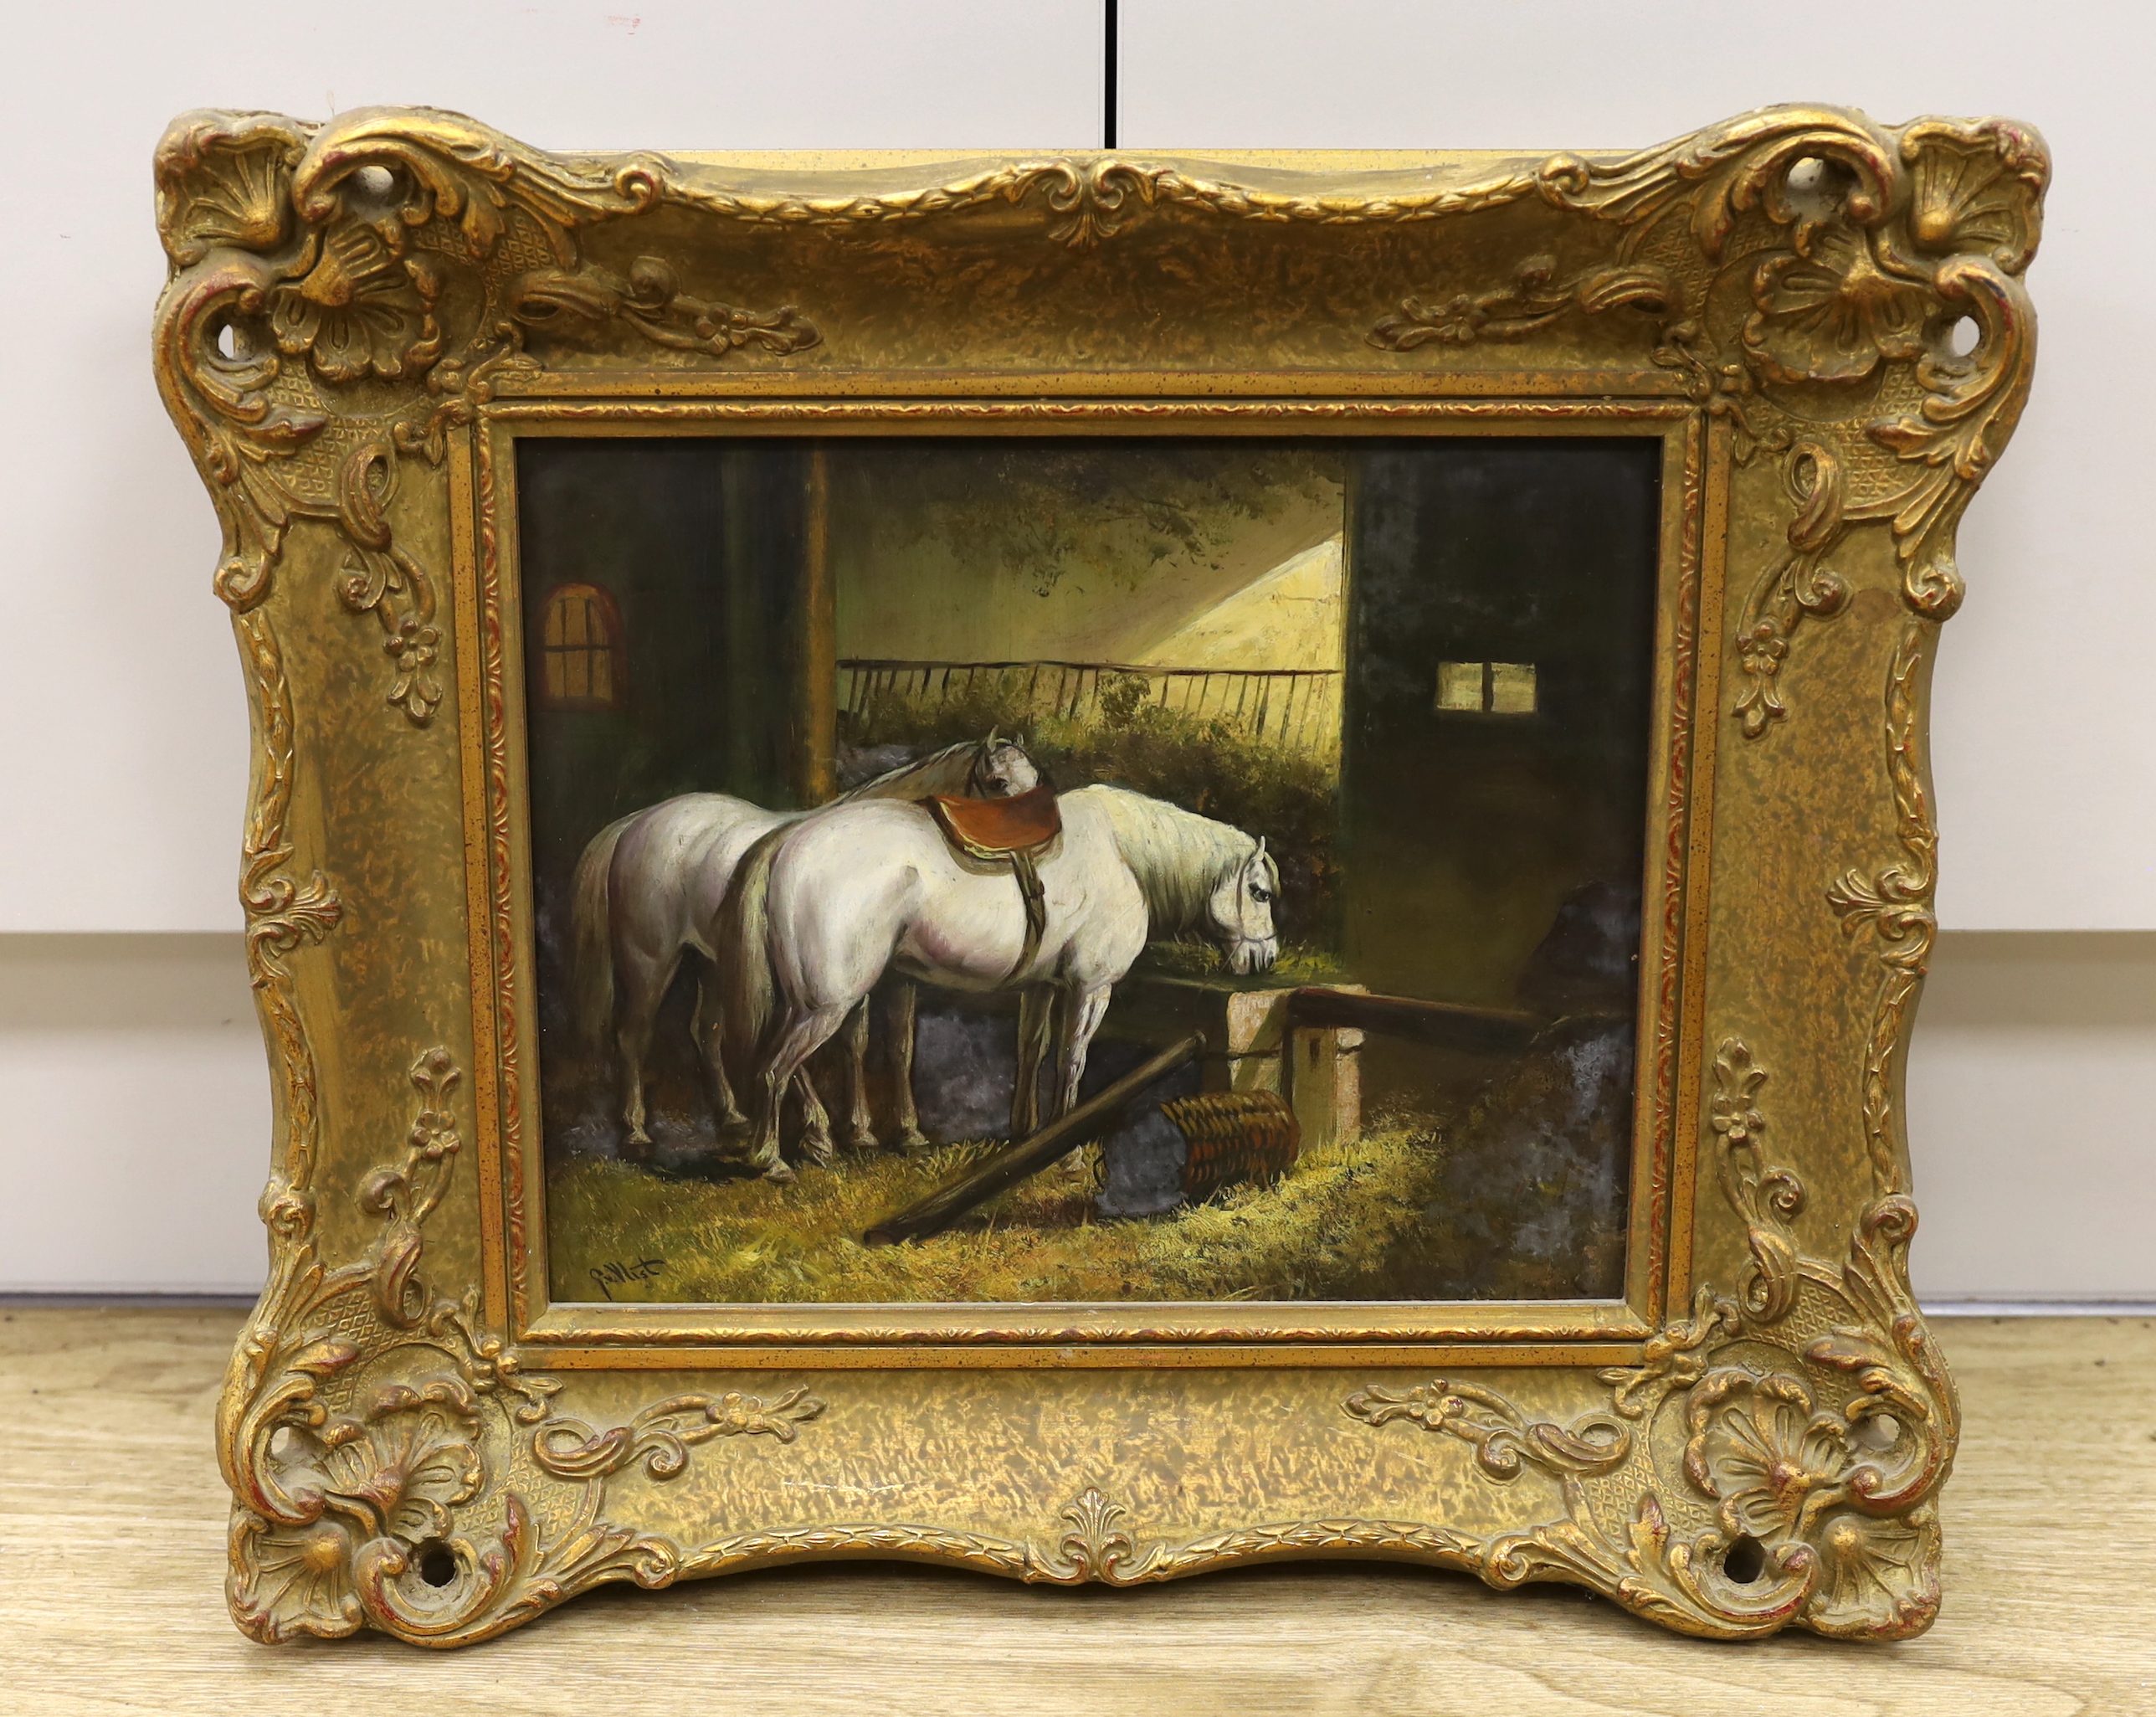 Dutch School, oil on board, Two horses in a stable, indistinctly signed, G.V Wist?, 23 x 29cm, ornate gilt frame